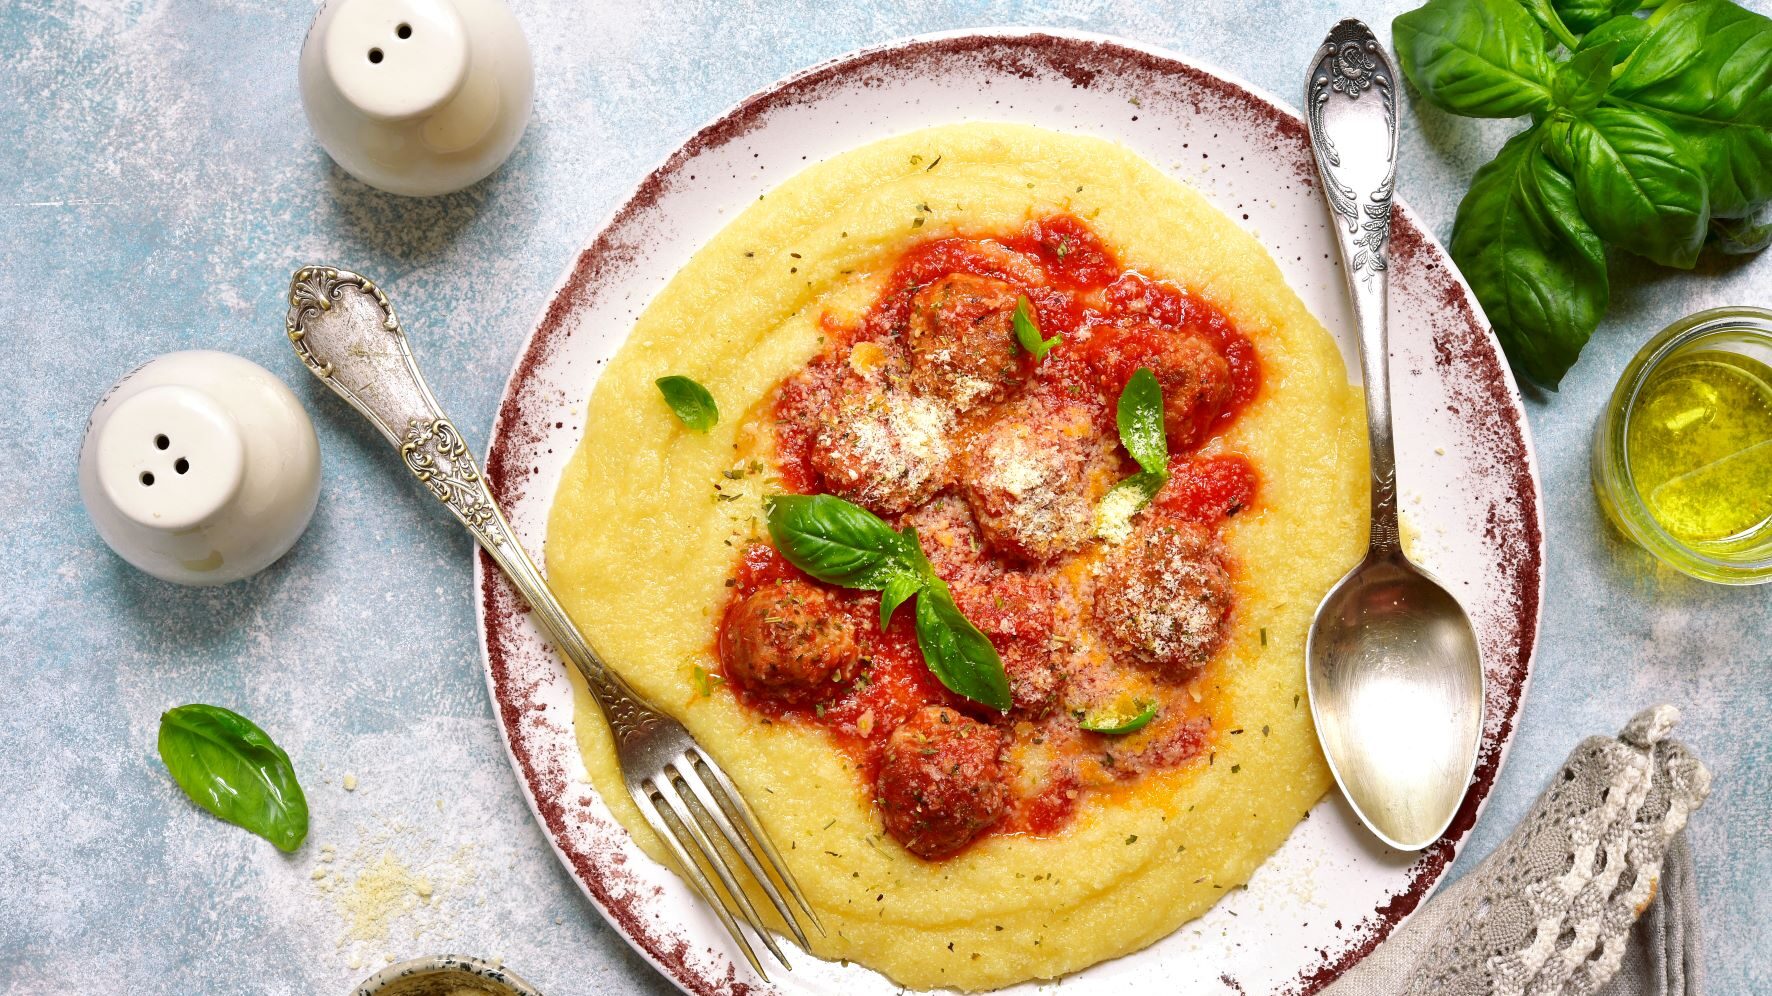 Image for Creamy Polenta with Kale and Meatballs